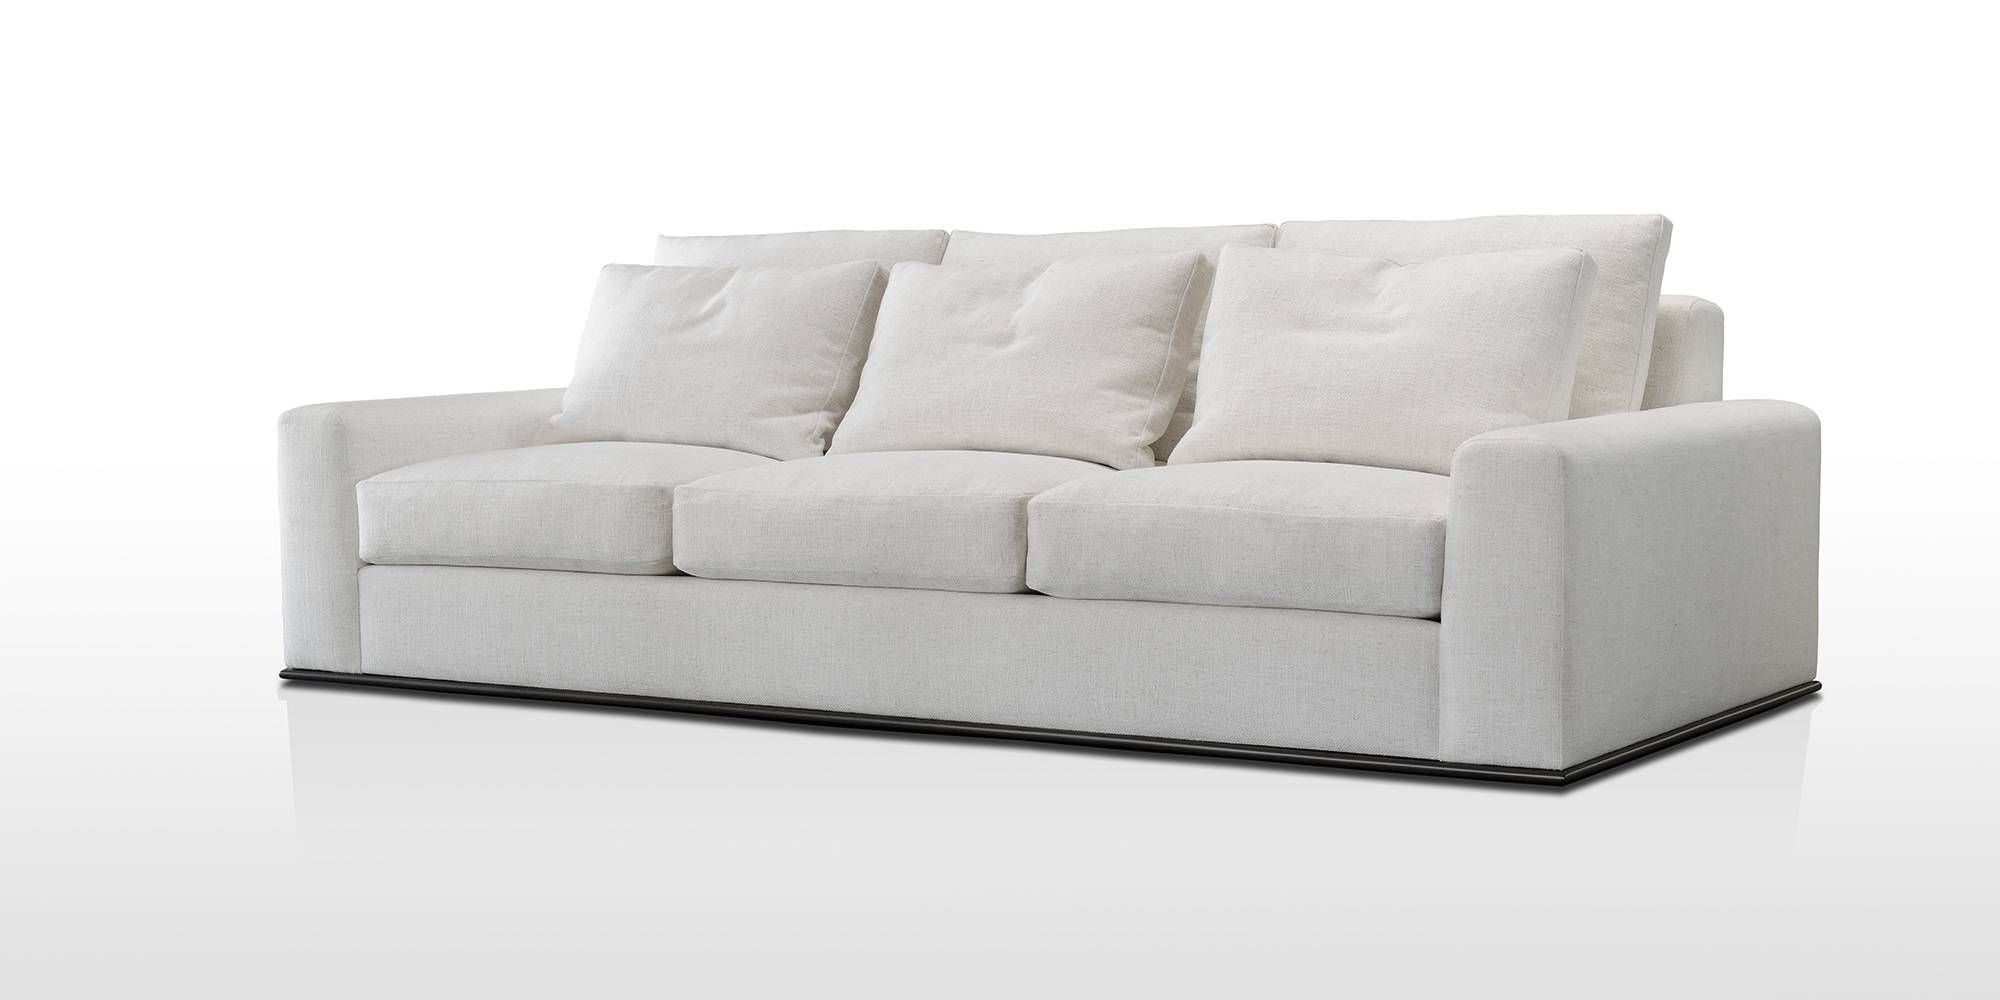 Sofas Archives – Nathan Anthony Furniture With Nathan Anthony Sofas (View 1 of 15)